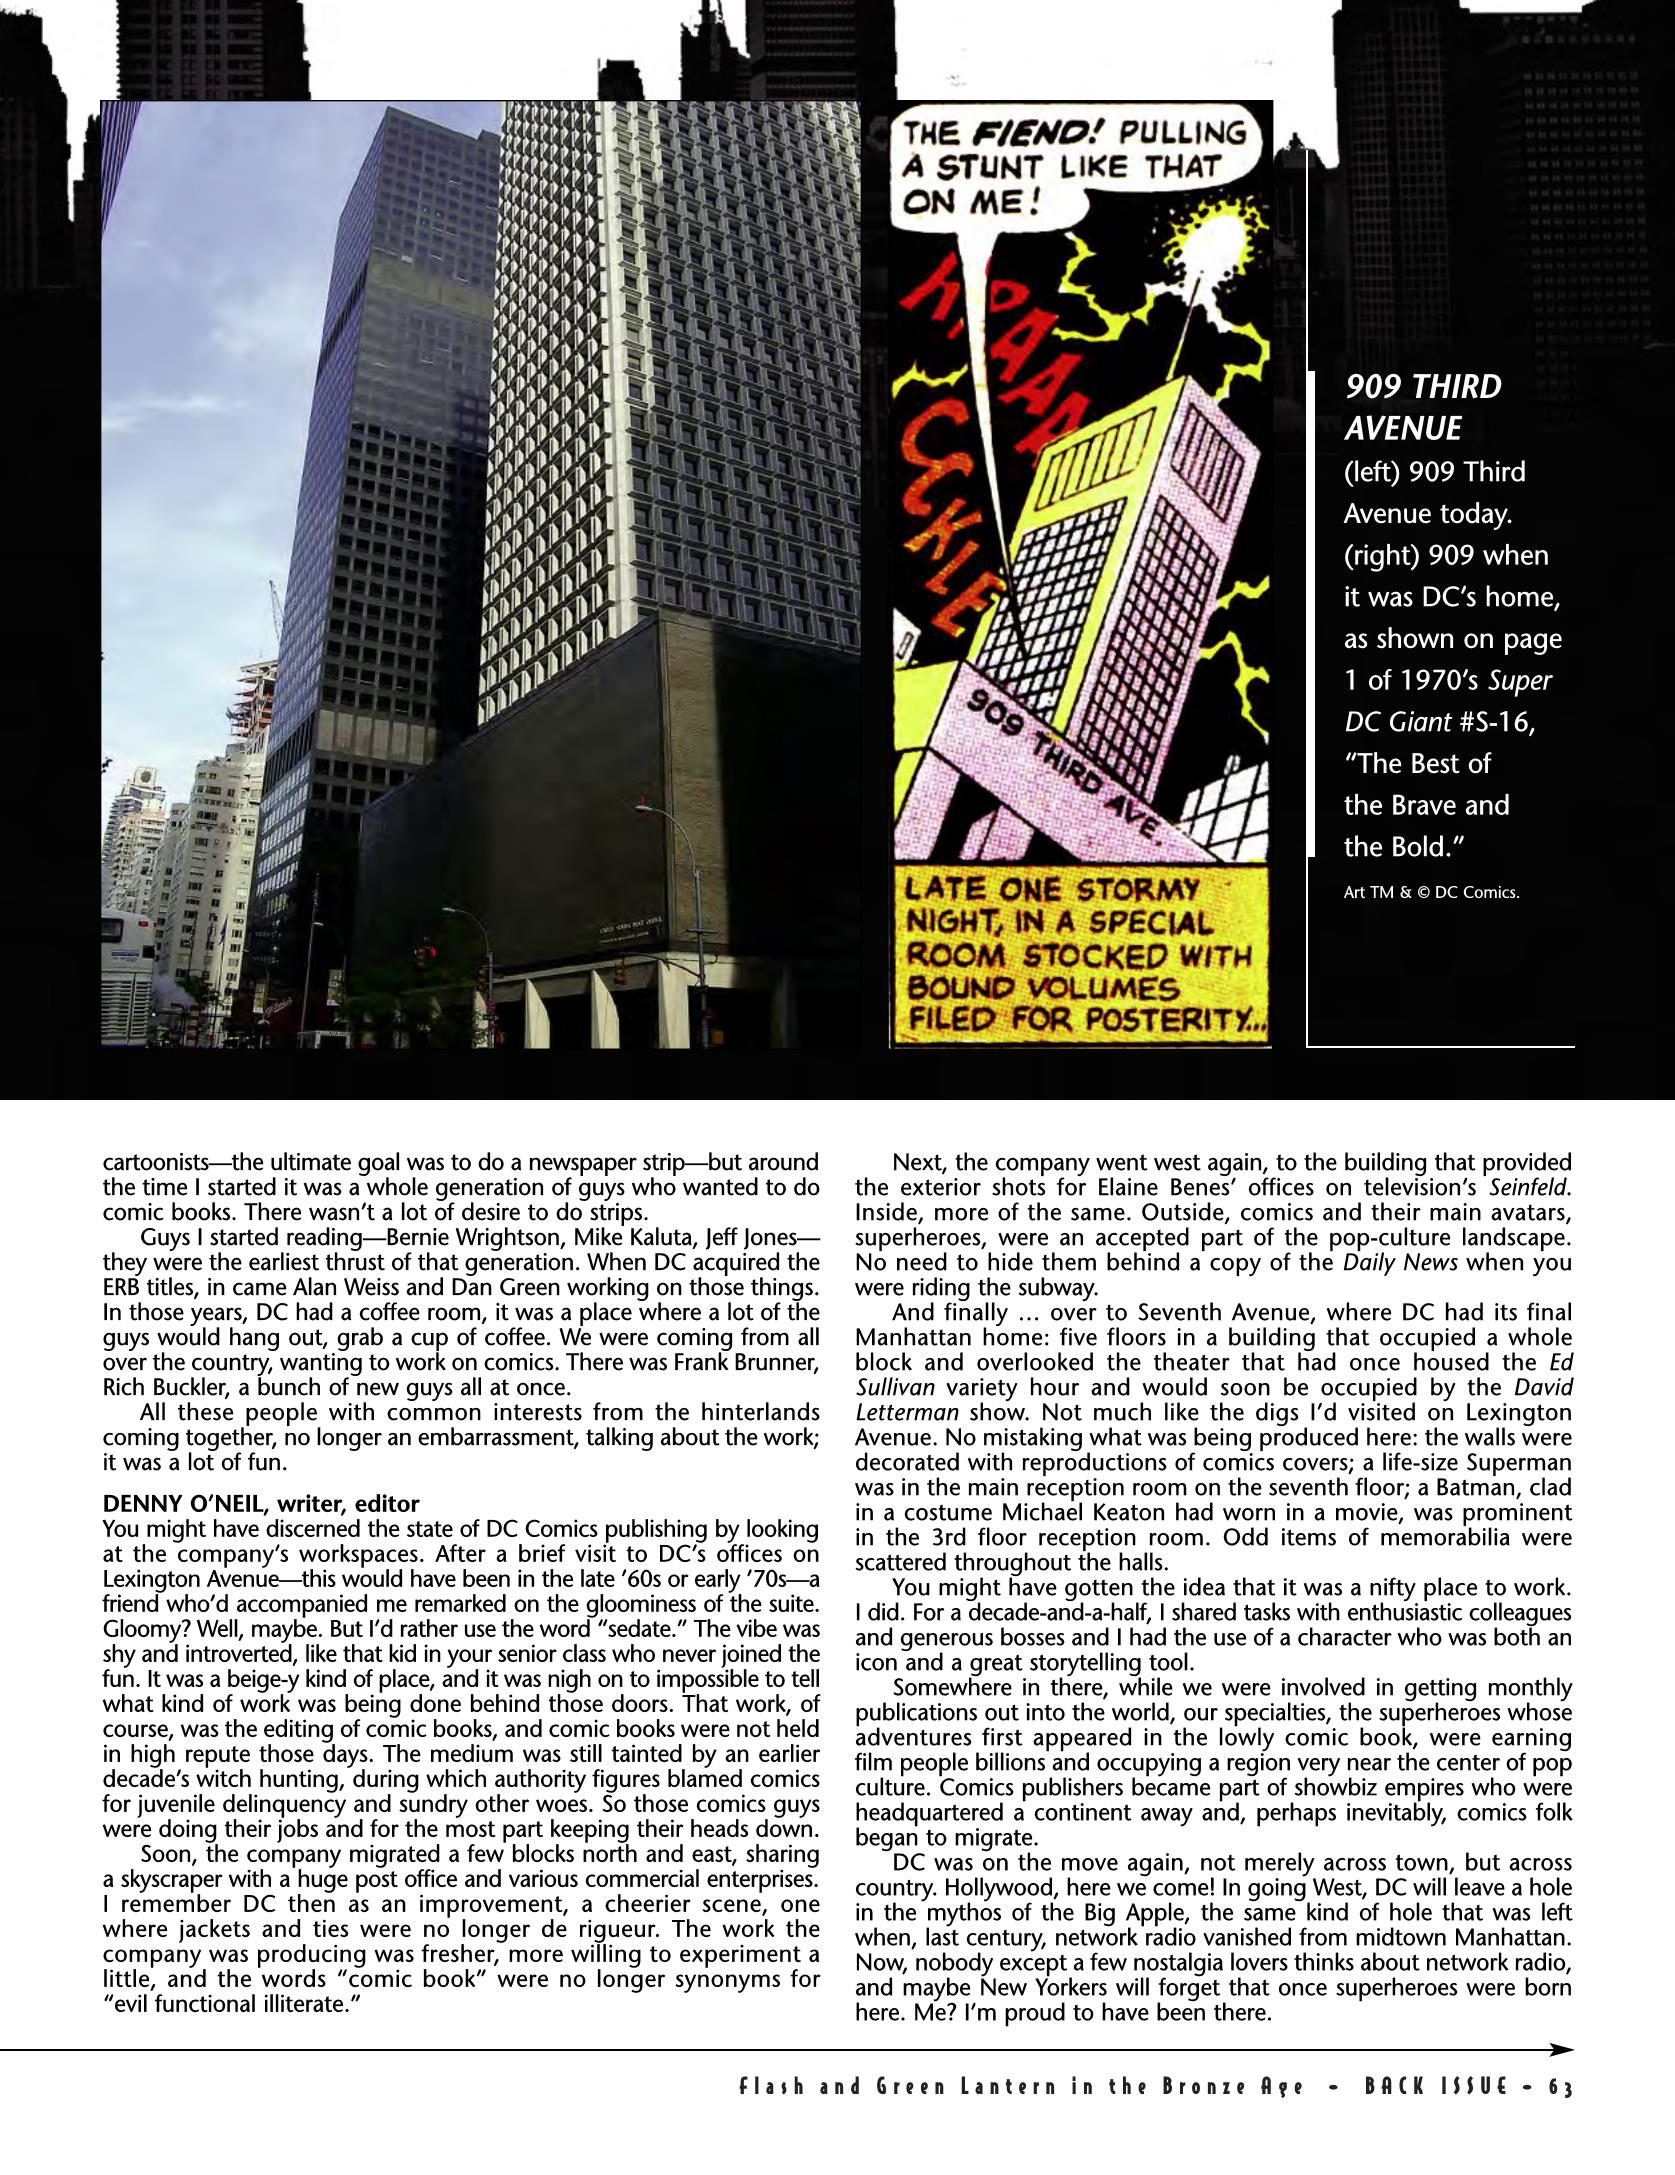 Read online Back Issue comic -  Issue #80 - 65